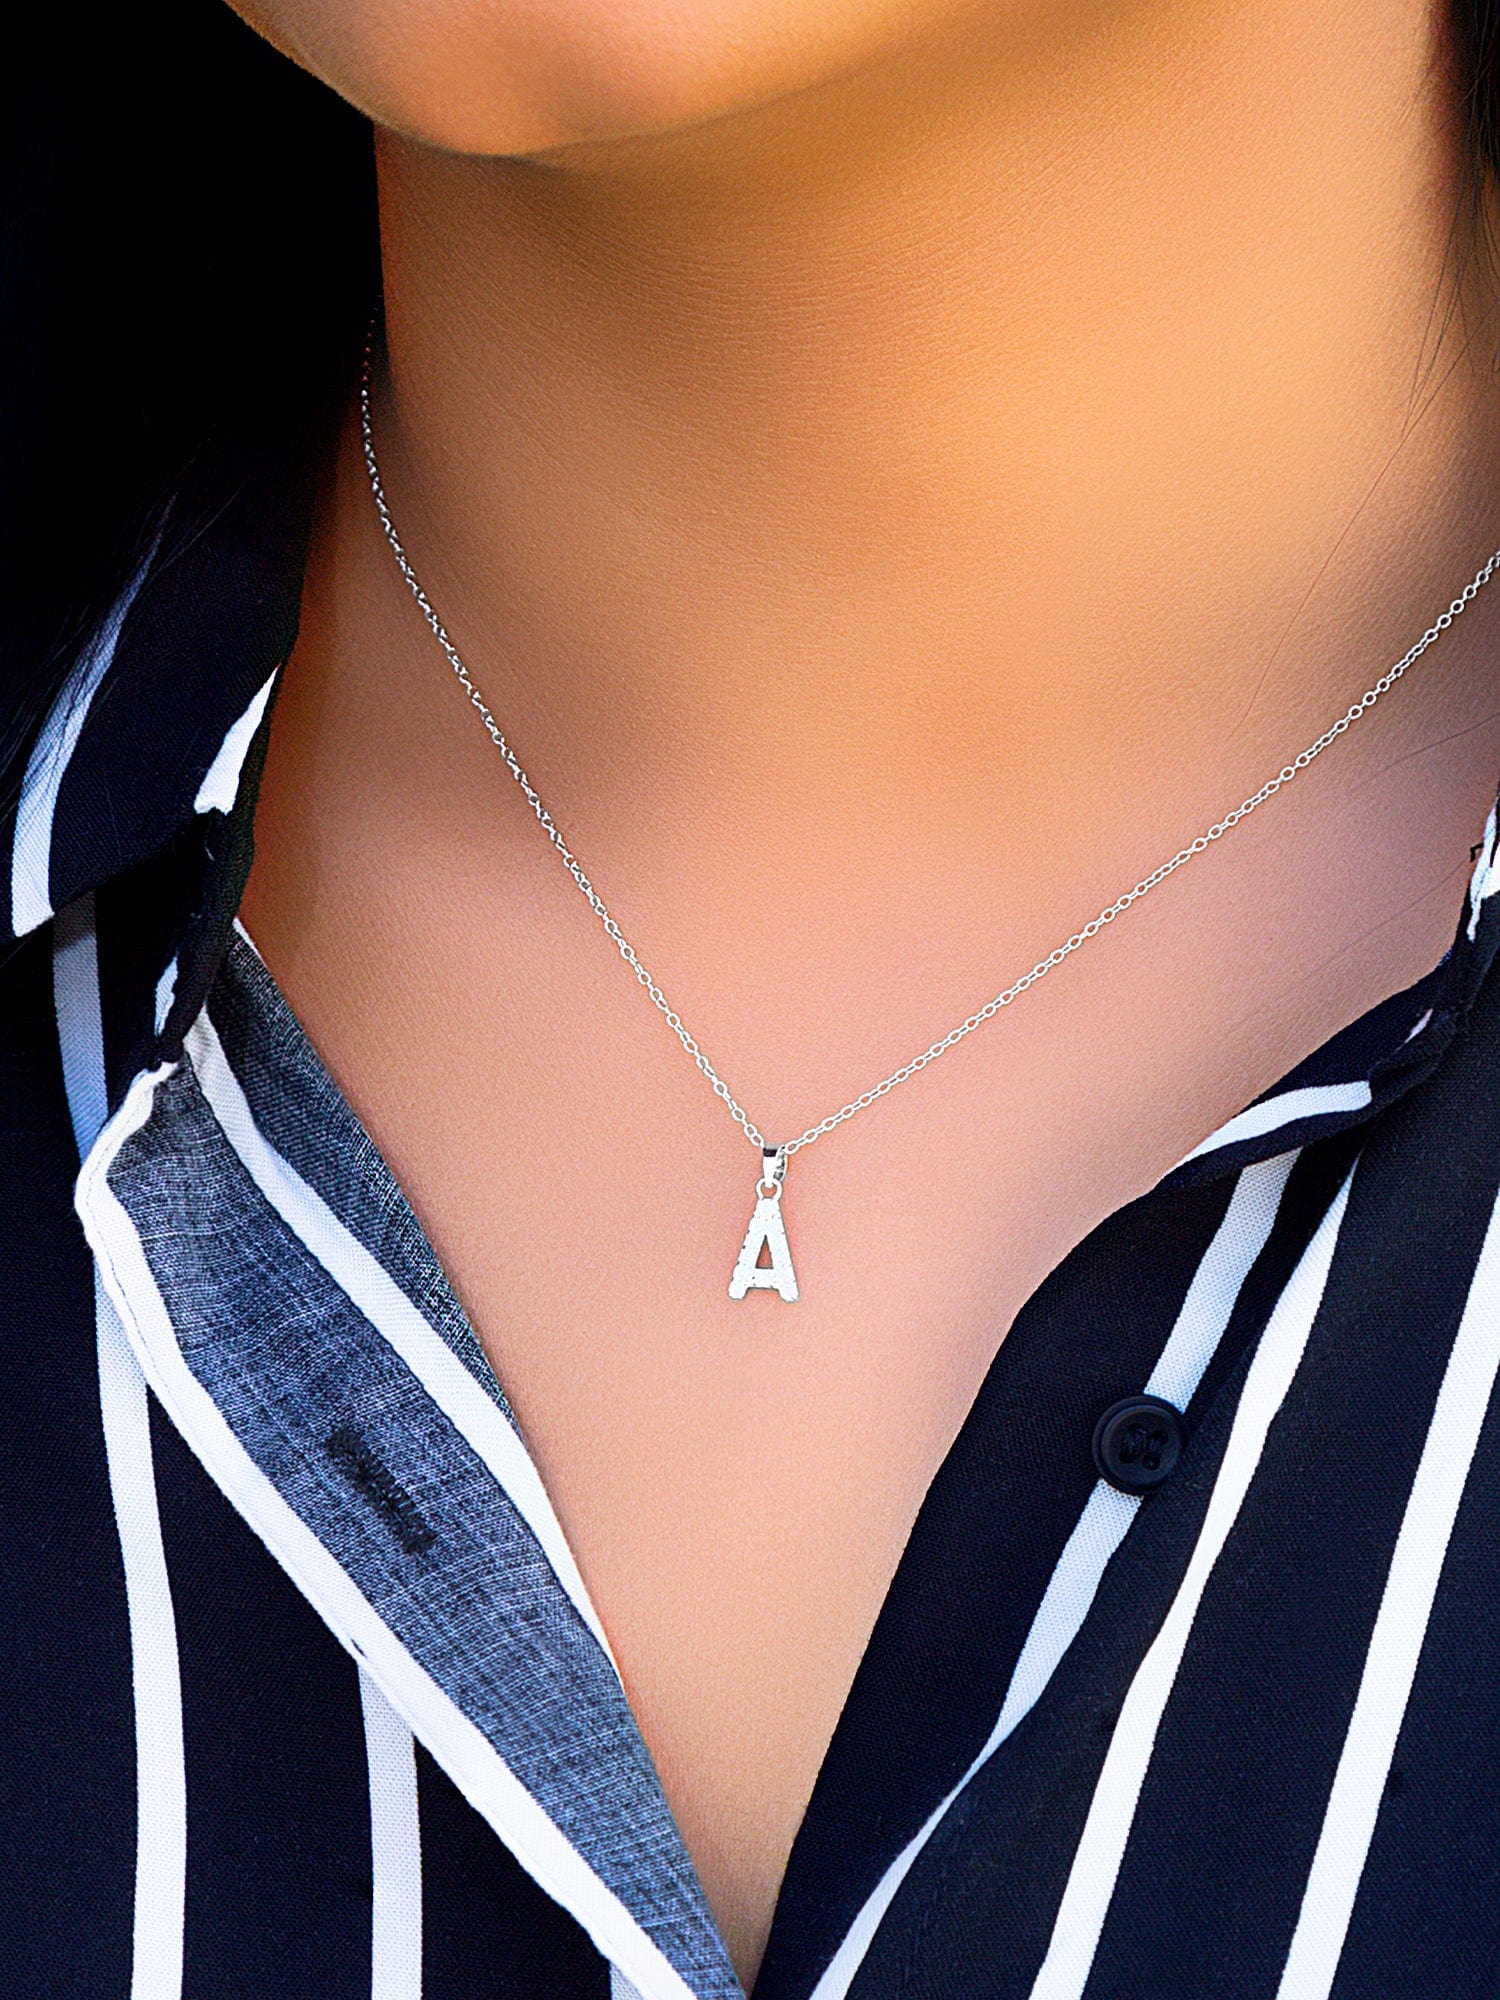 Sterling Silver Initial Necklace with CZ accent